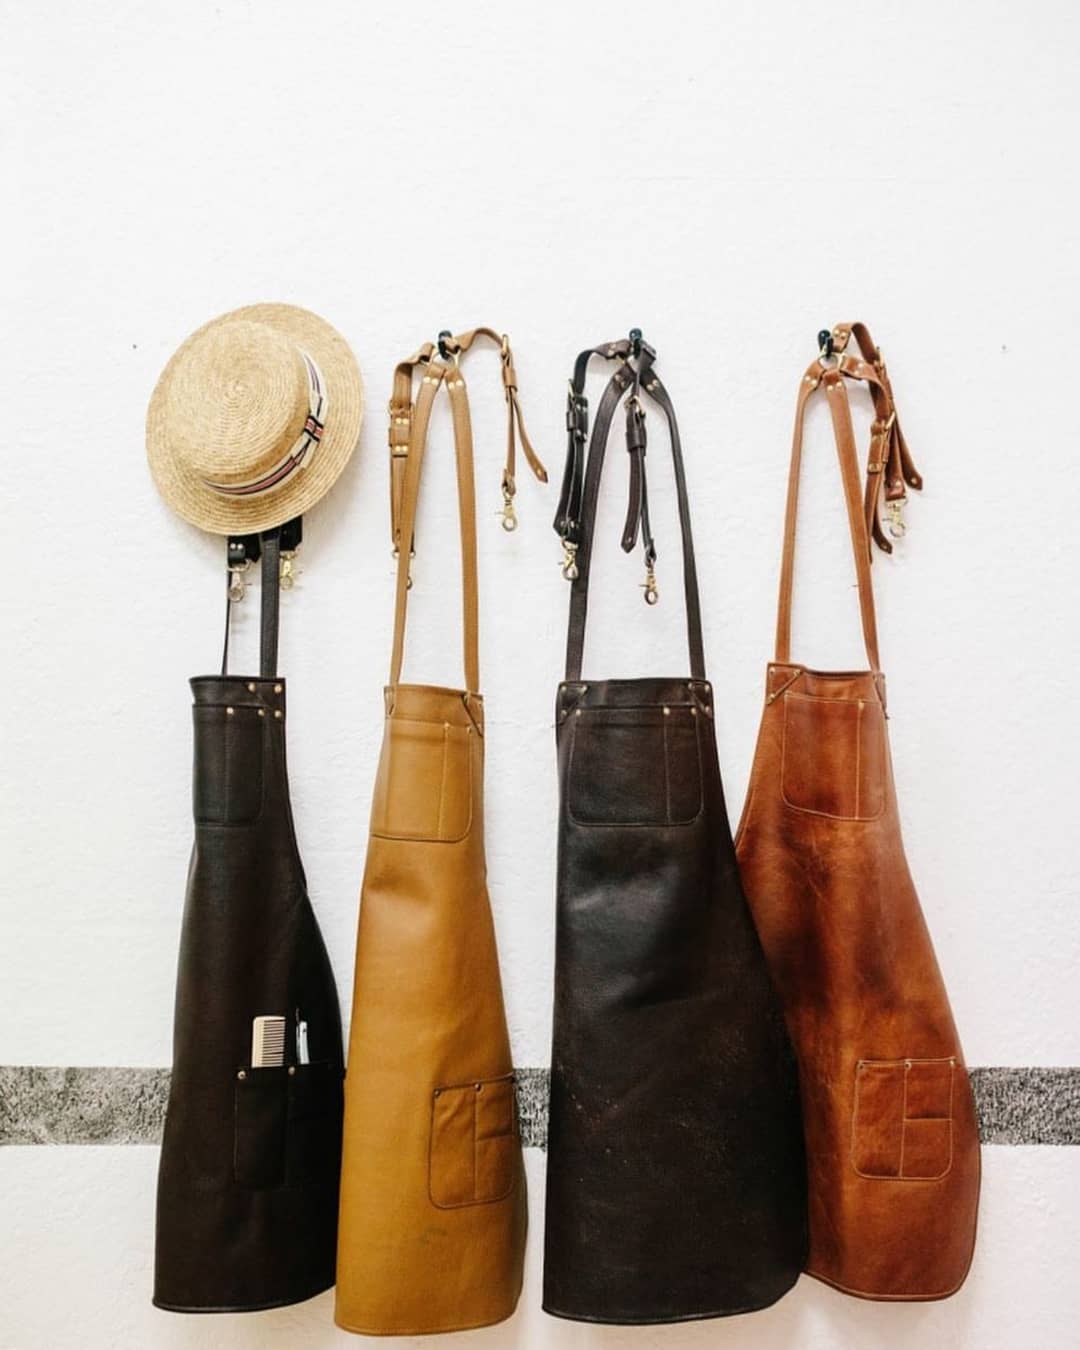 5 reasons why using an apron is important for you and your business: